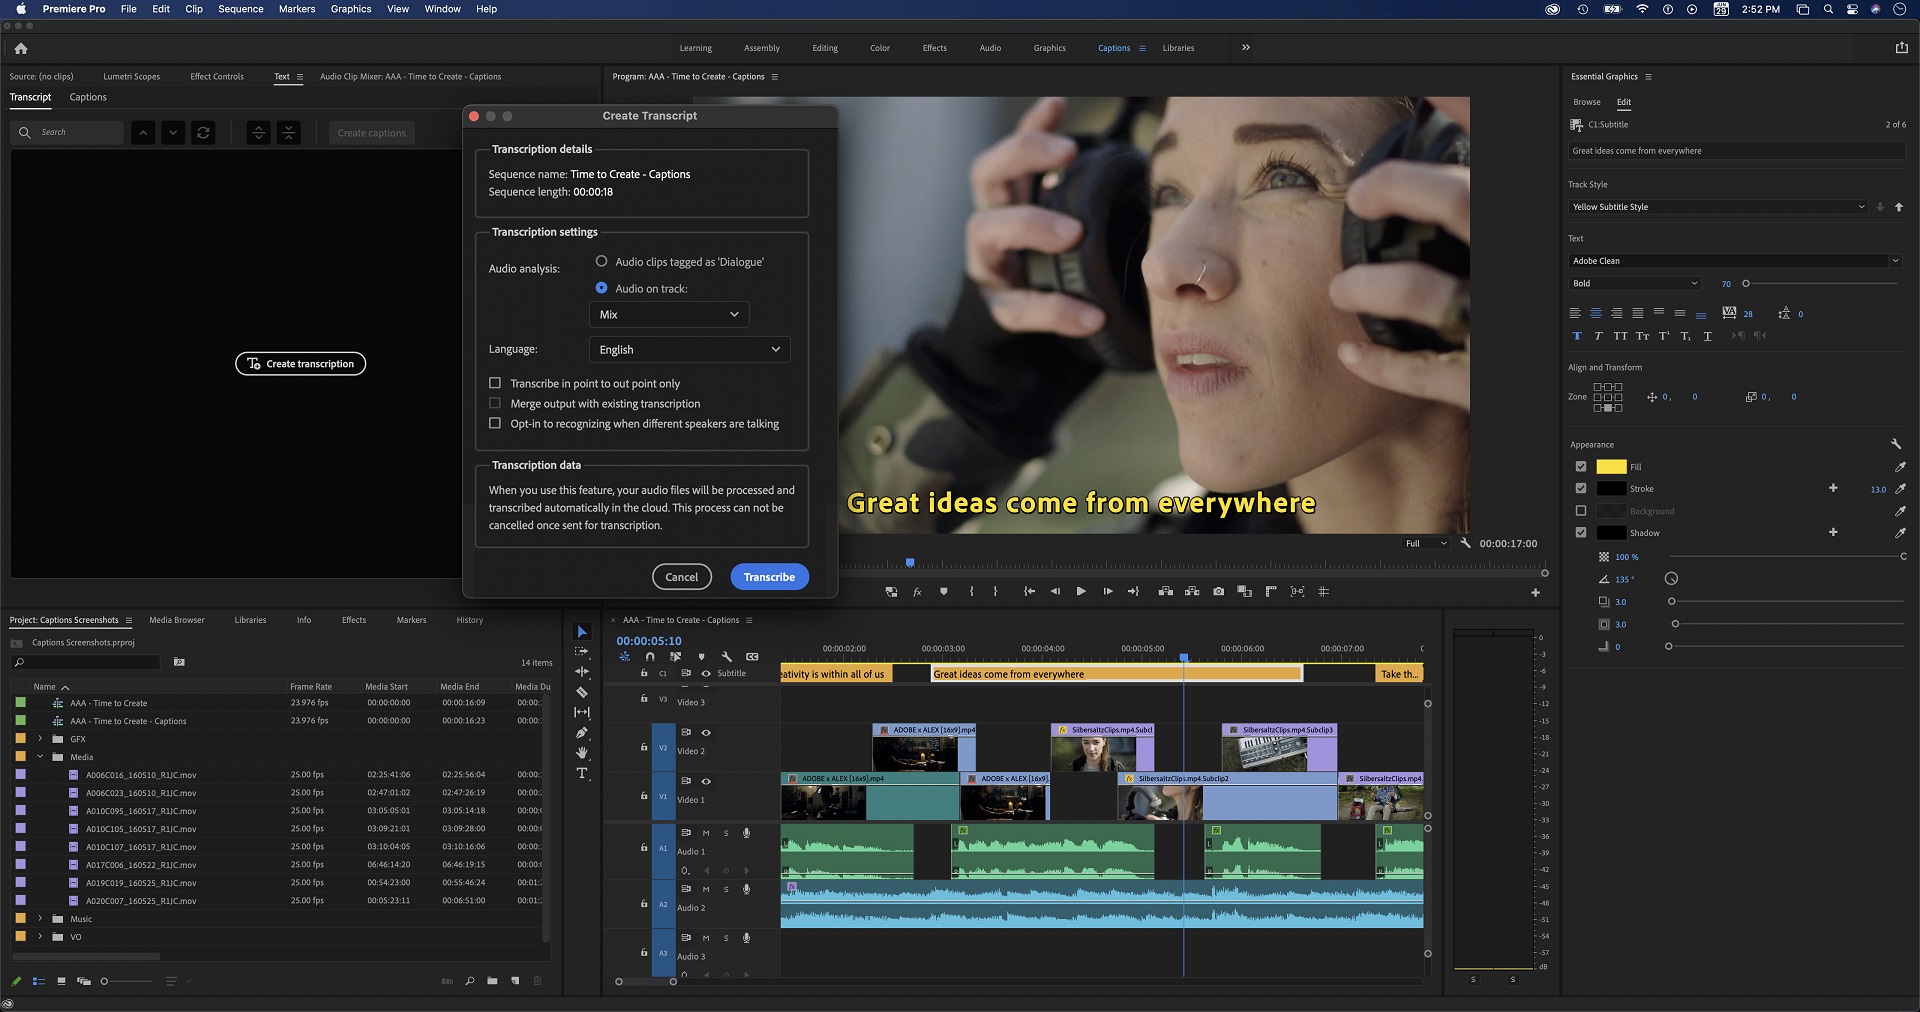 Adobe Creative Cloud July Updates - Premiere Pro and After Effects | CineD